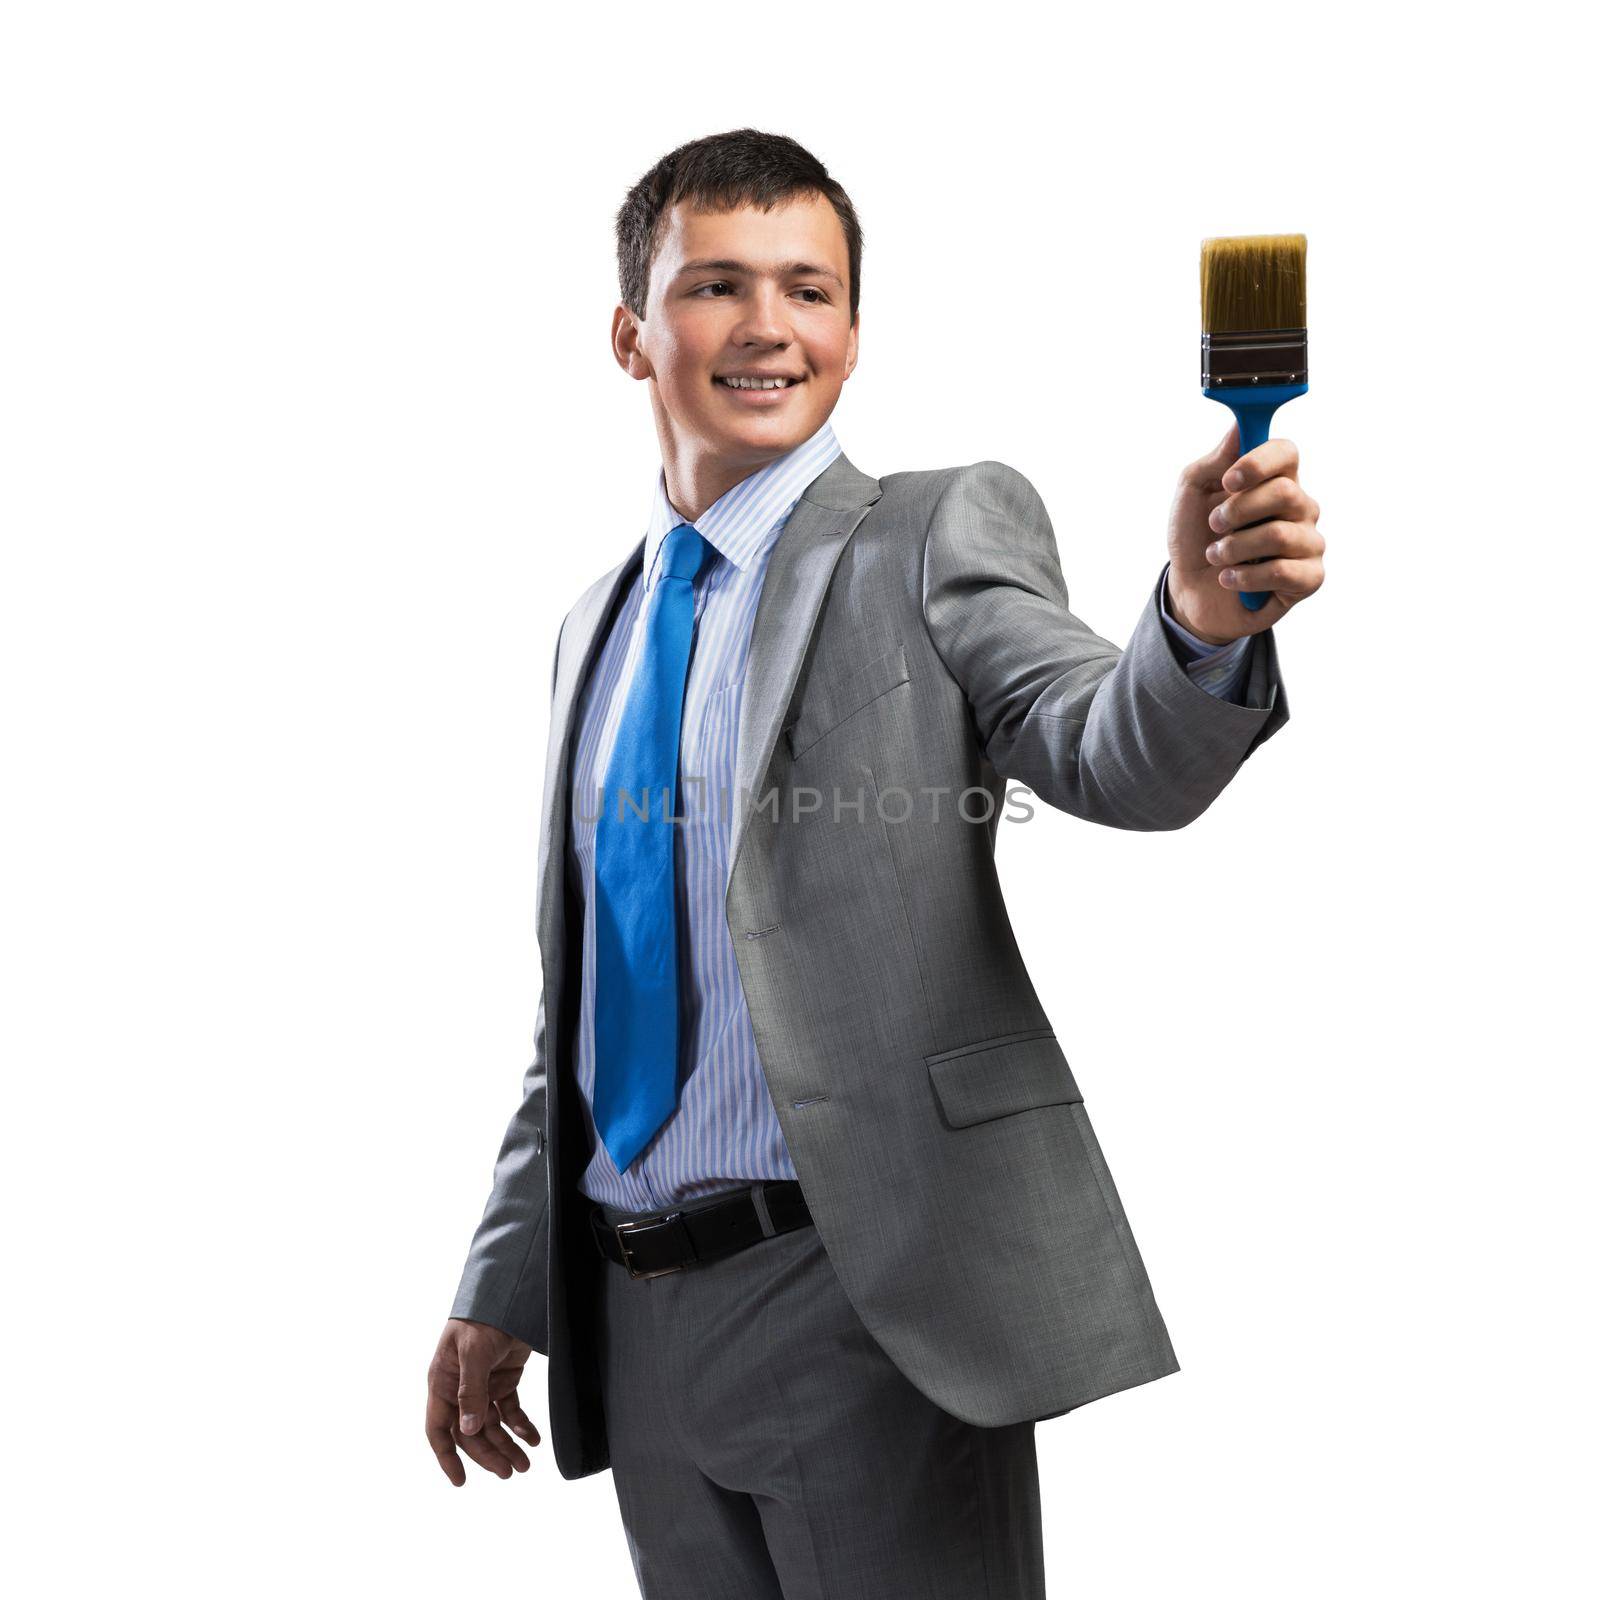 Smiling creative businessman painter holding paintbrush in hand. Portrait of joyful handsome man in business suit and tie isolated on white background. Ambitions and creativity in business concept.